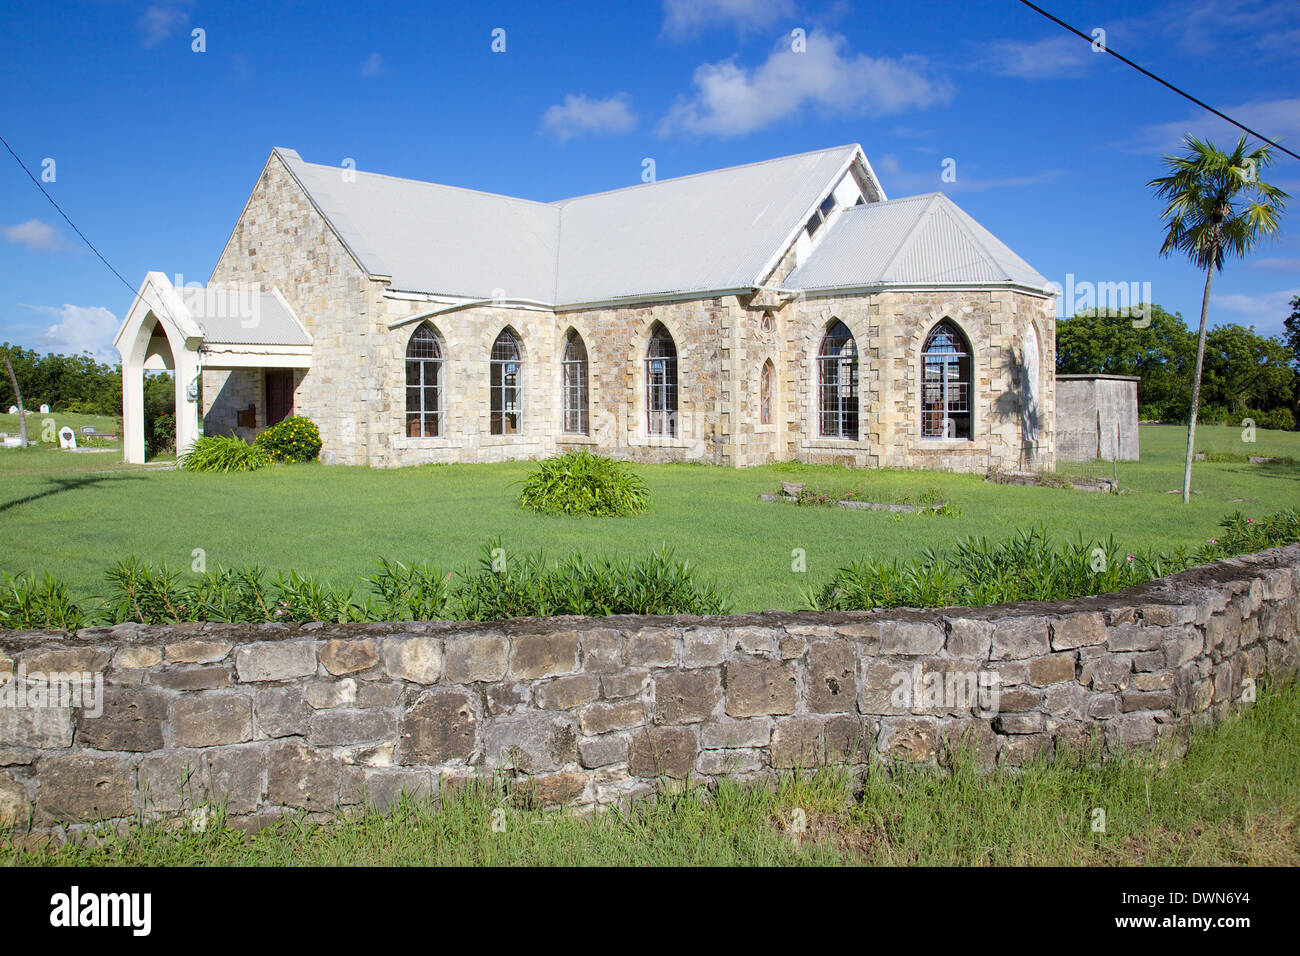 St. Stephens Anglican Church, St. Peter, Antigua, Leeward Islands, West Indies, Caribbean, Central America Stock Photo